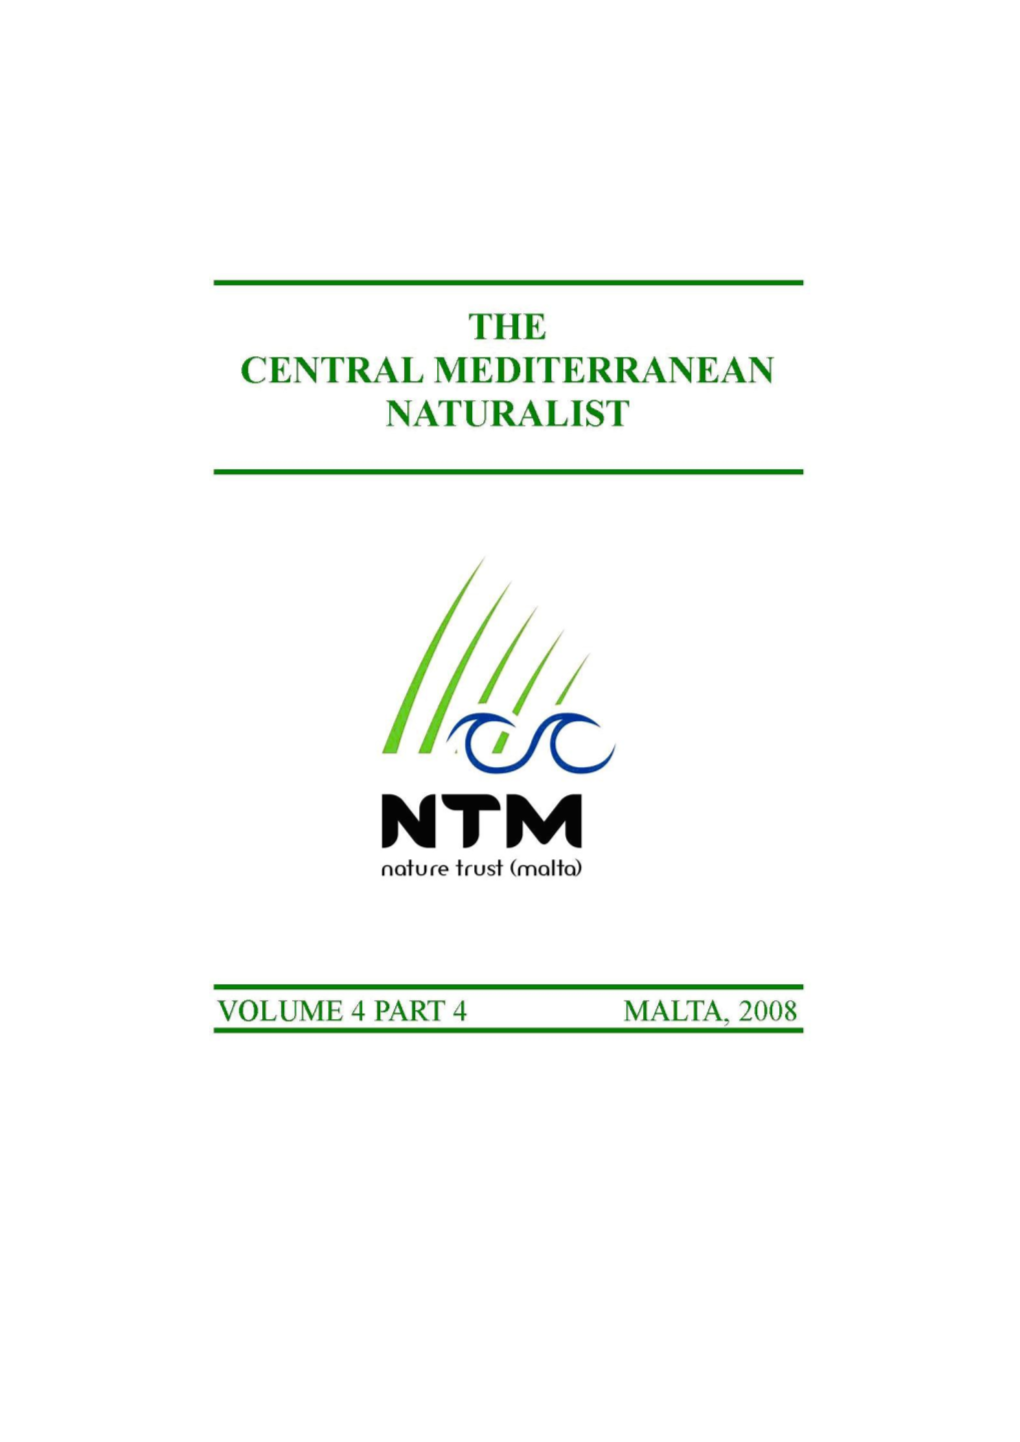 The Complete Contents of the Central Mediterranean Naturalist, Potamon and the Maltese